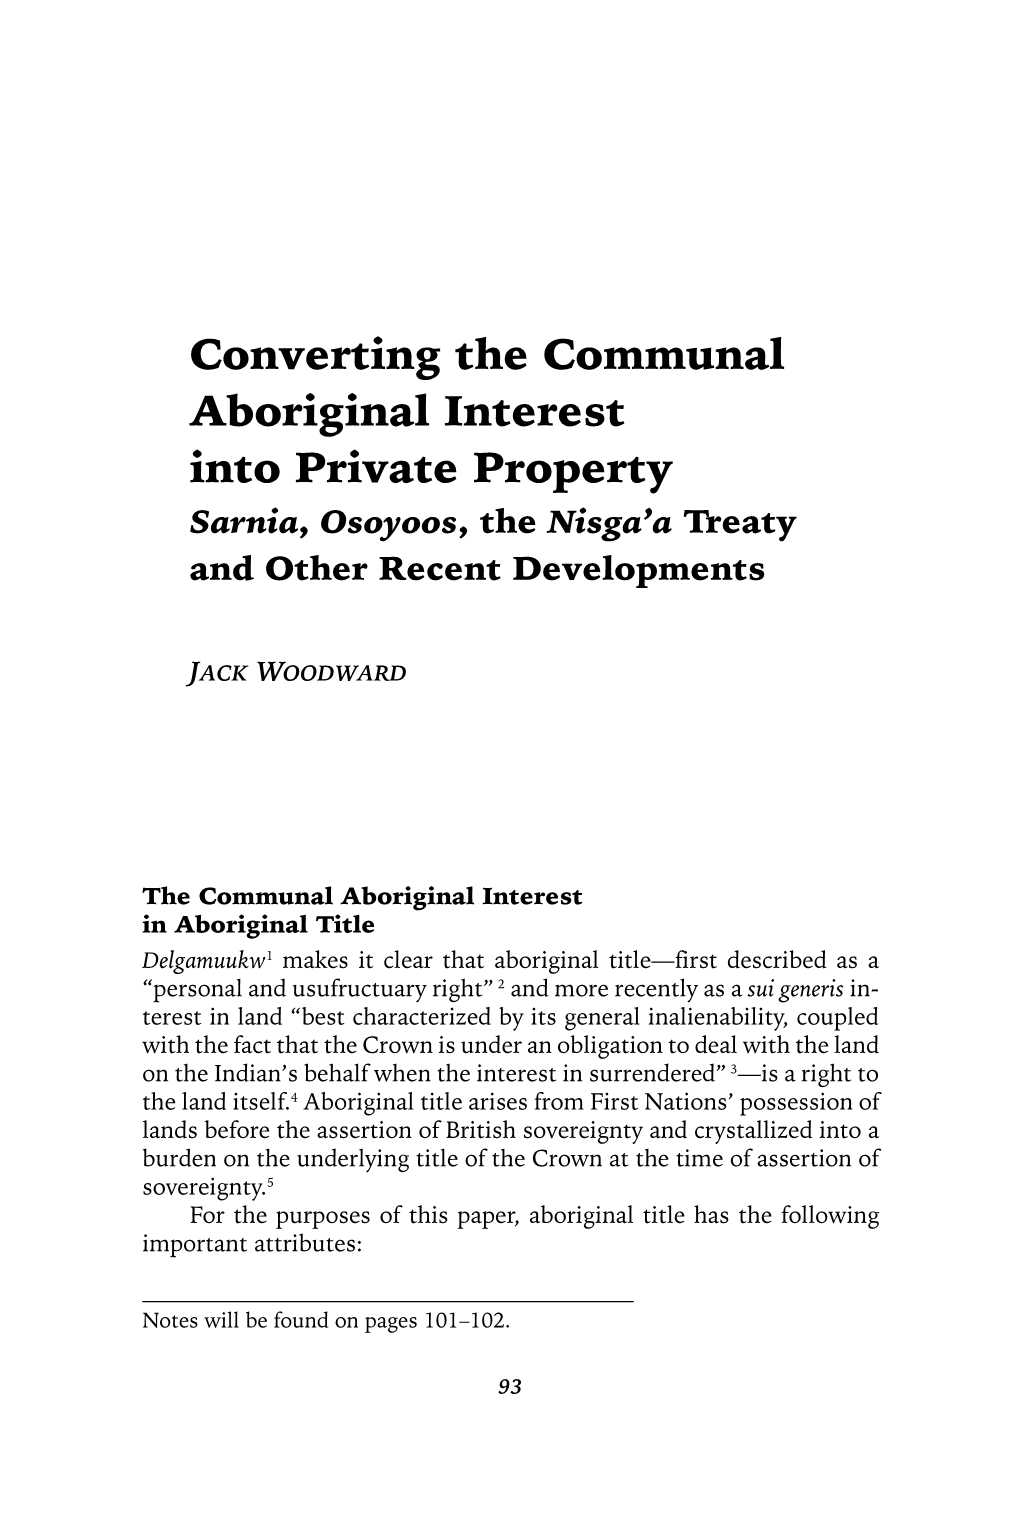 Converting the Communal Aboriginal Interest Into Private Property Sarnia, Osoyoos, the Nisga’A Treaty and Other Recent Developments